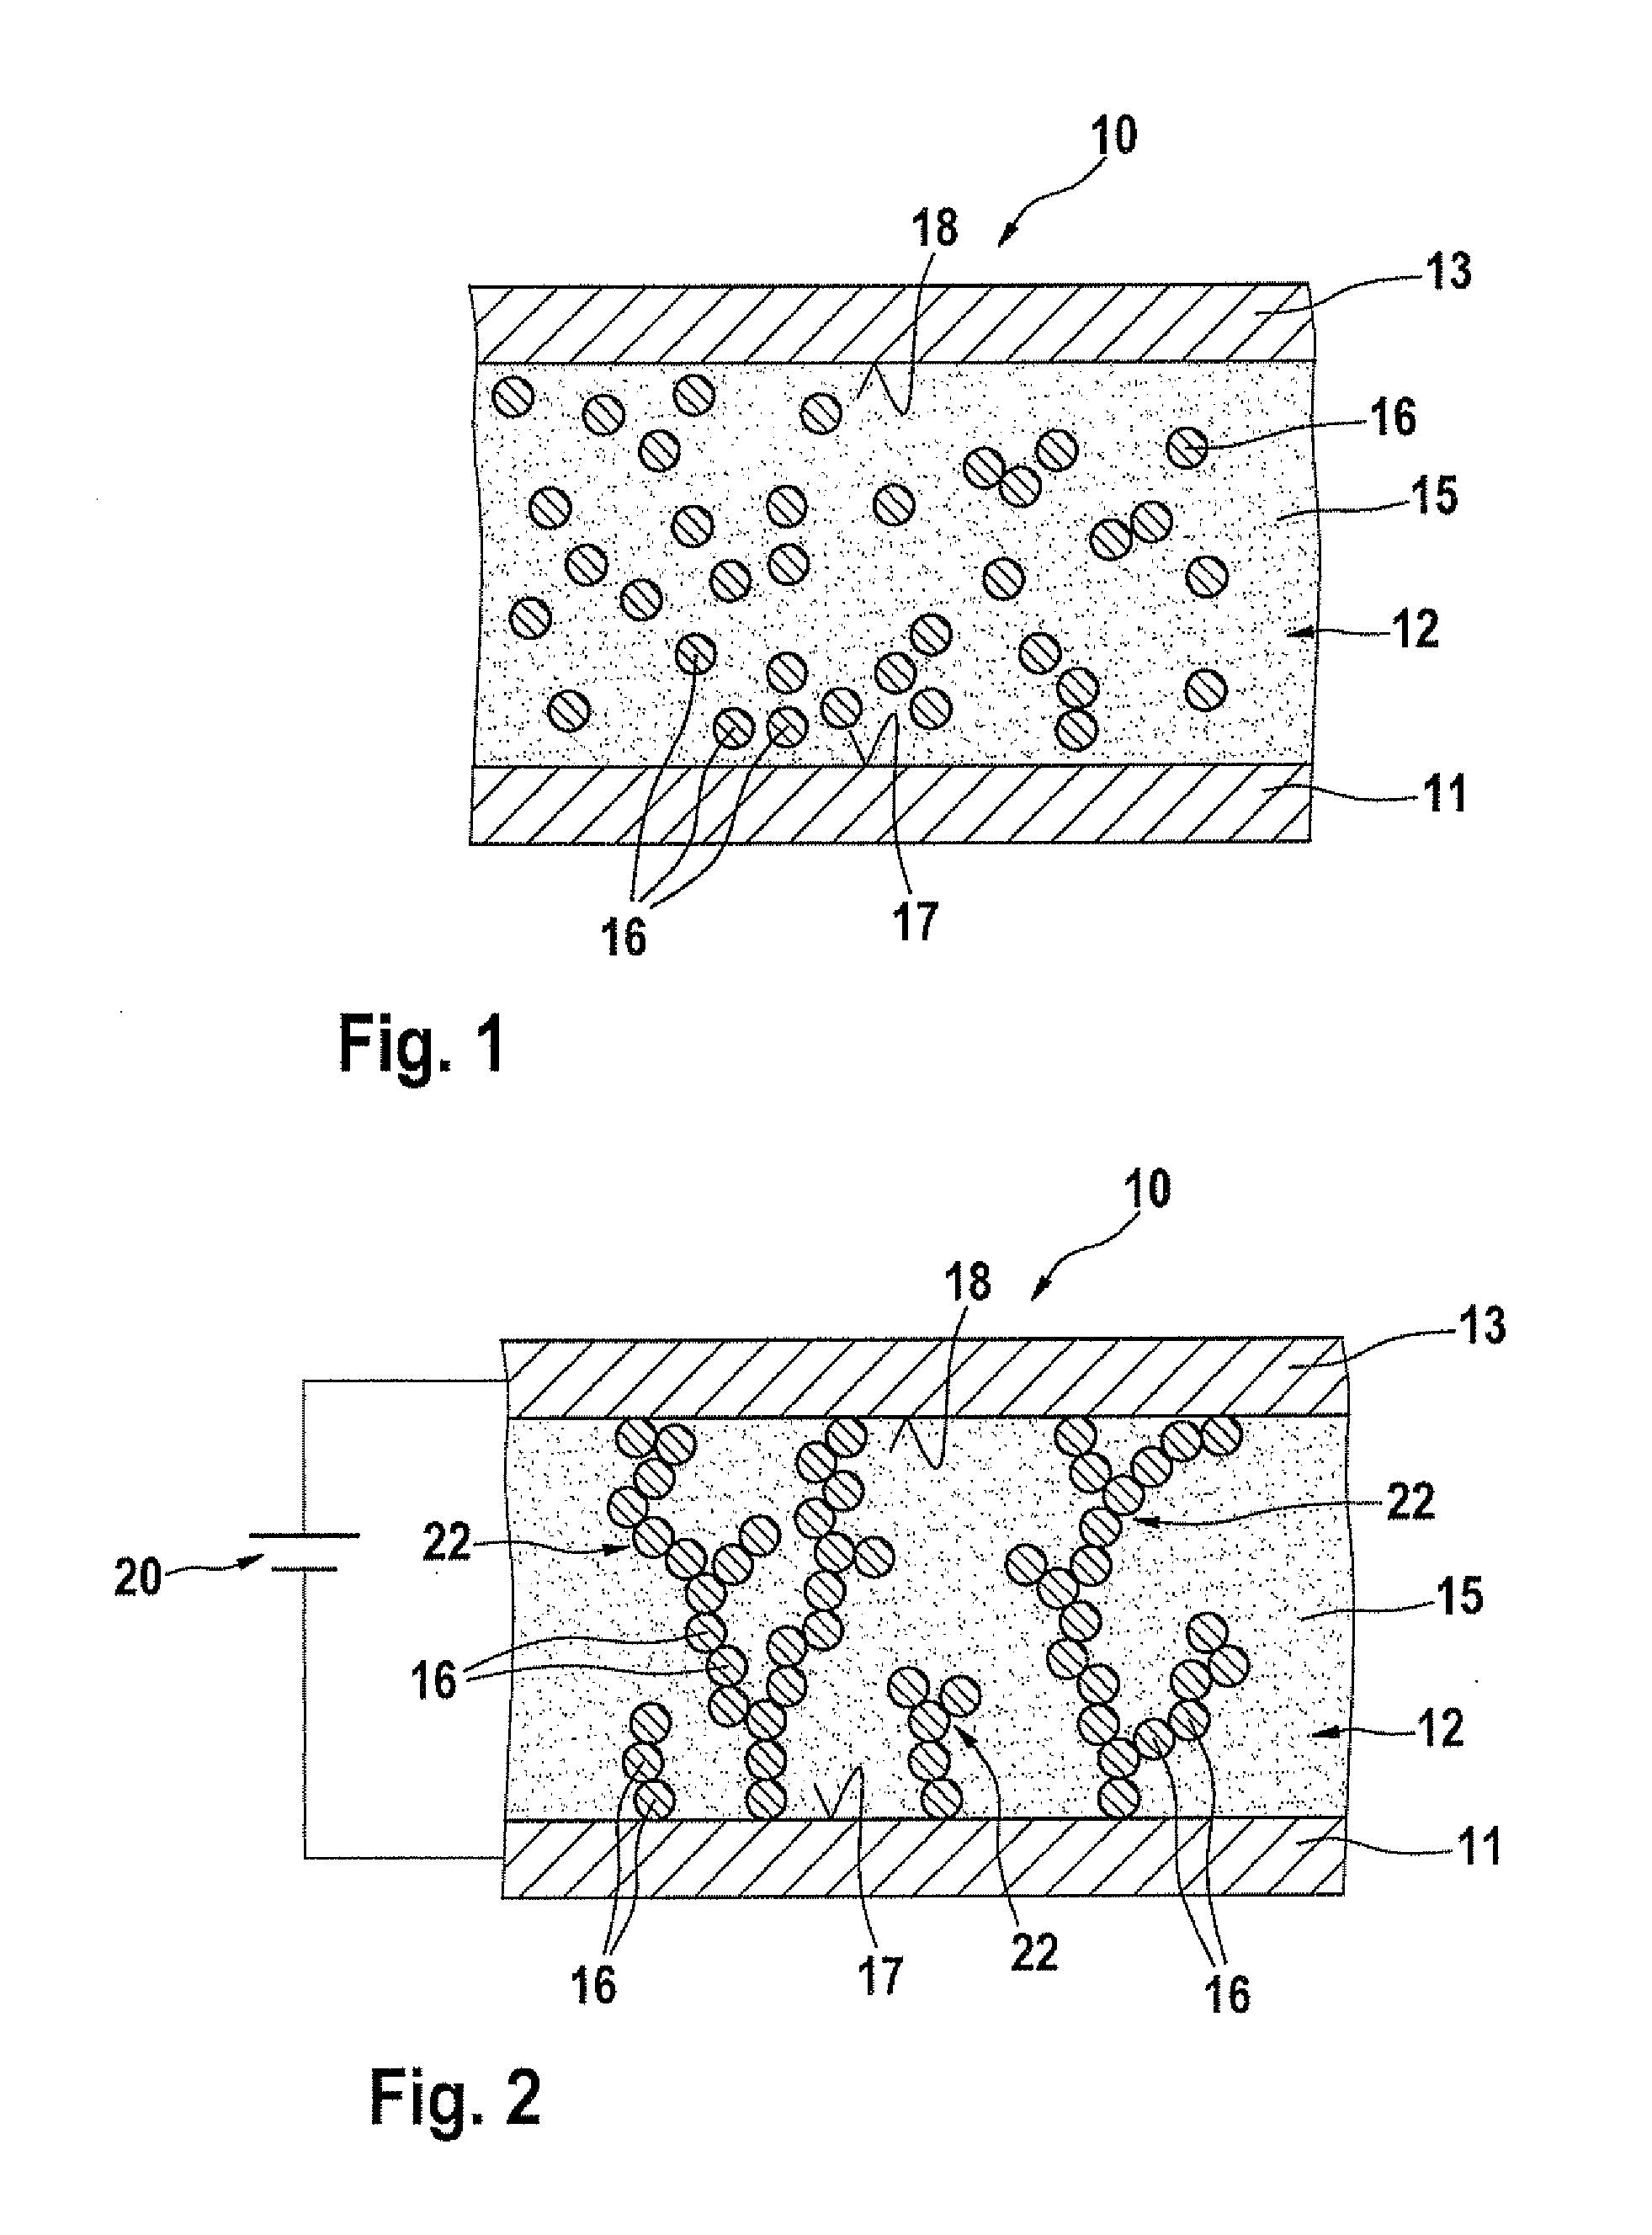 Heat-conducting system between two component parts and method for preparing a heat-conducting system